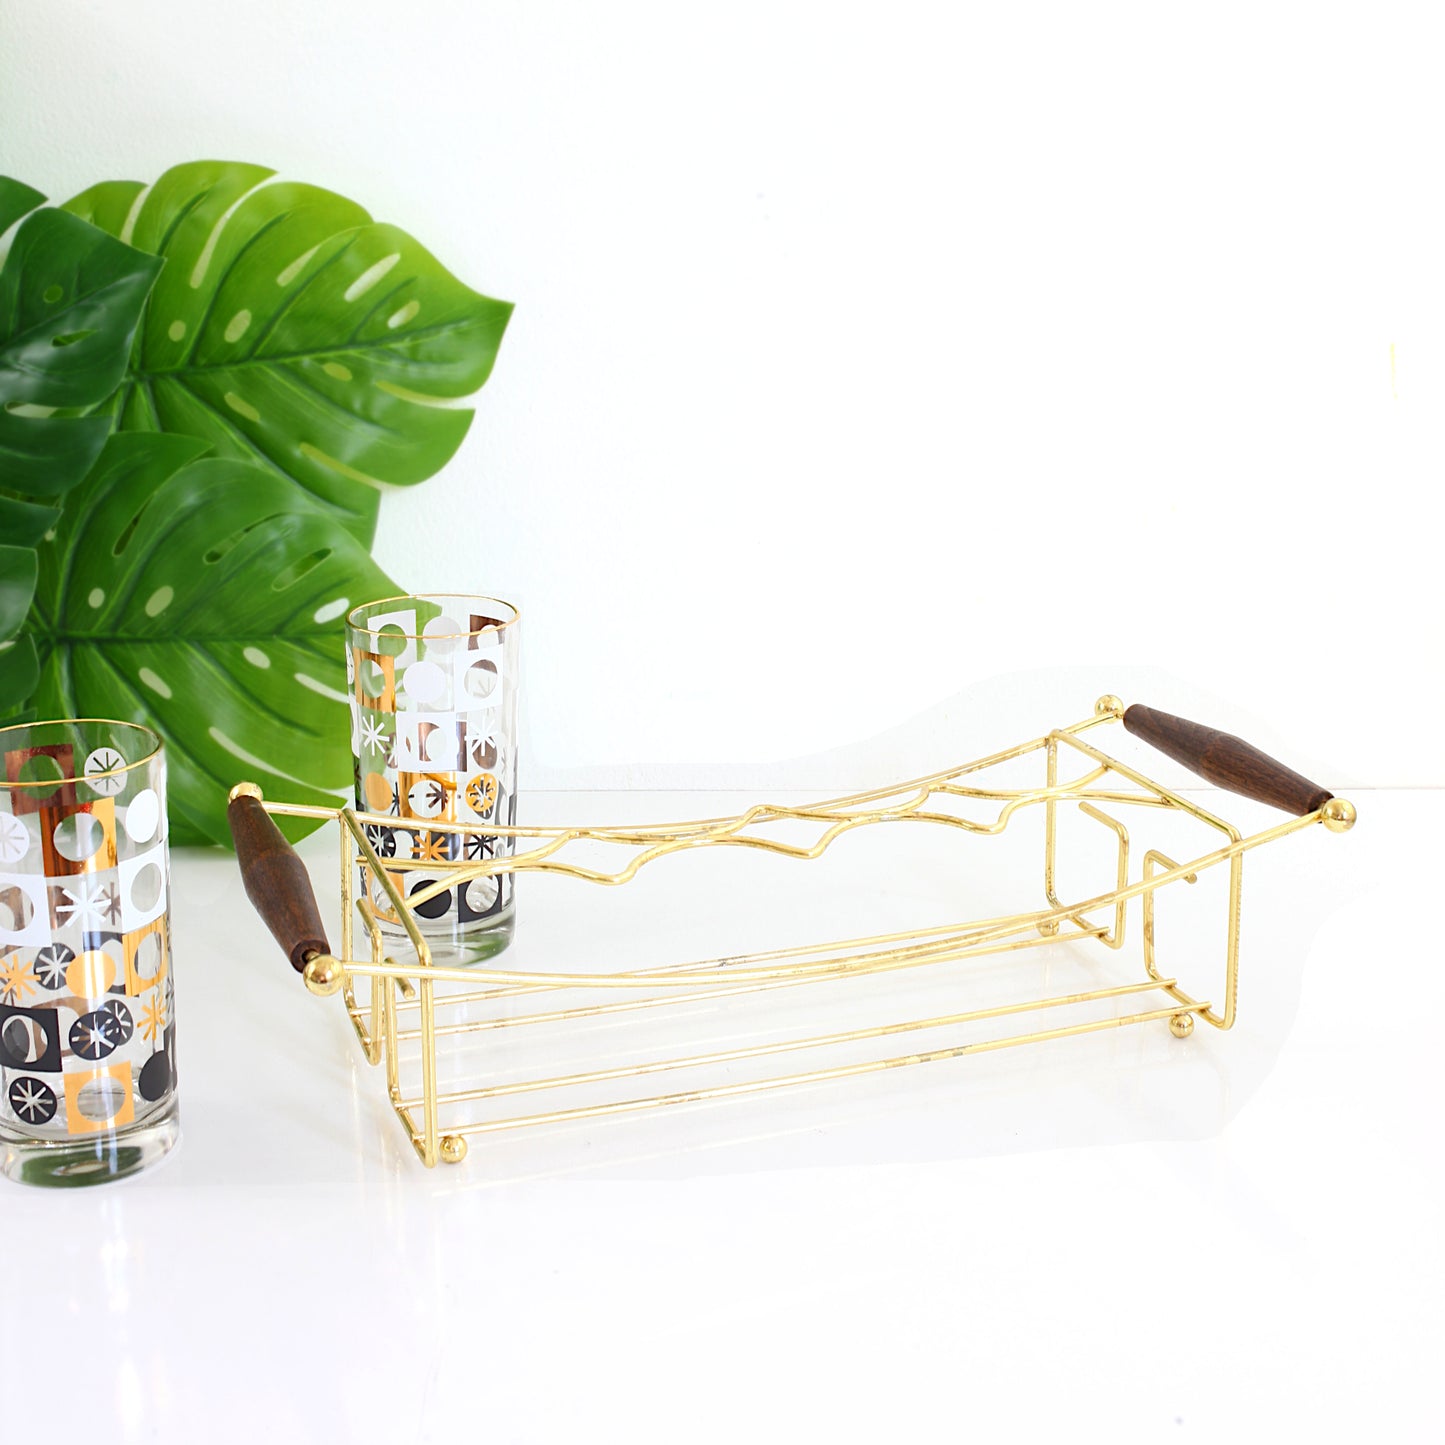 SOLD - Mid Century Black White & Gold Atomic Cocktail Glasses with Caddy